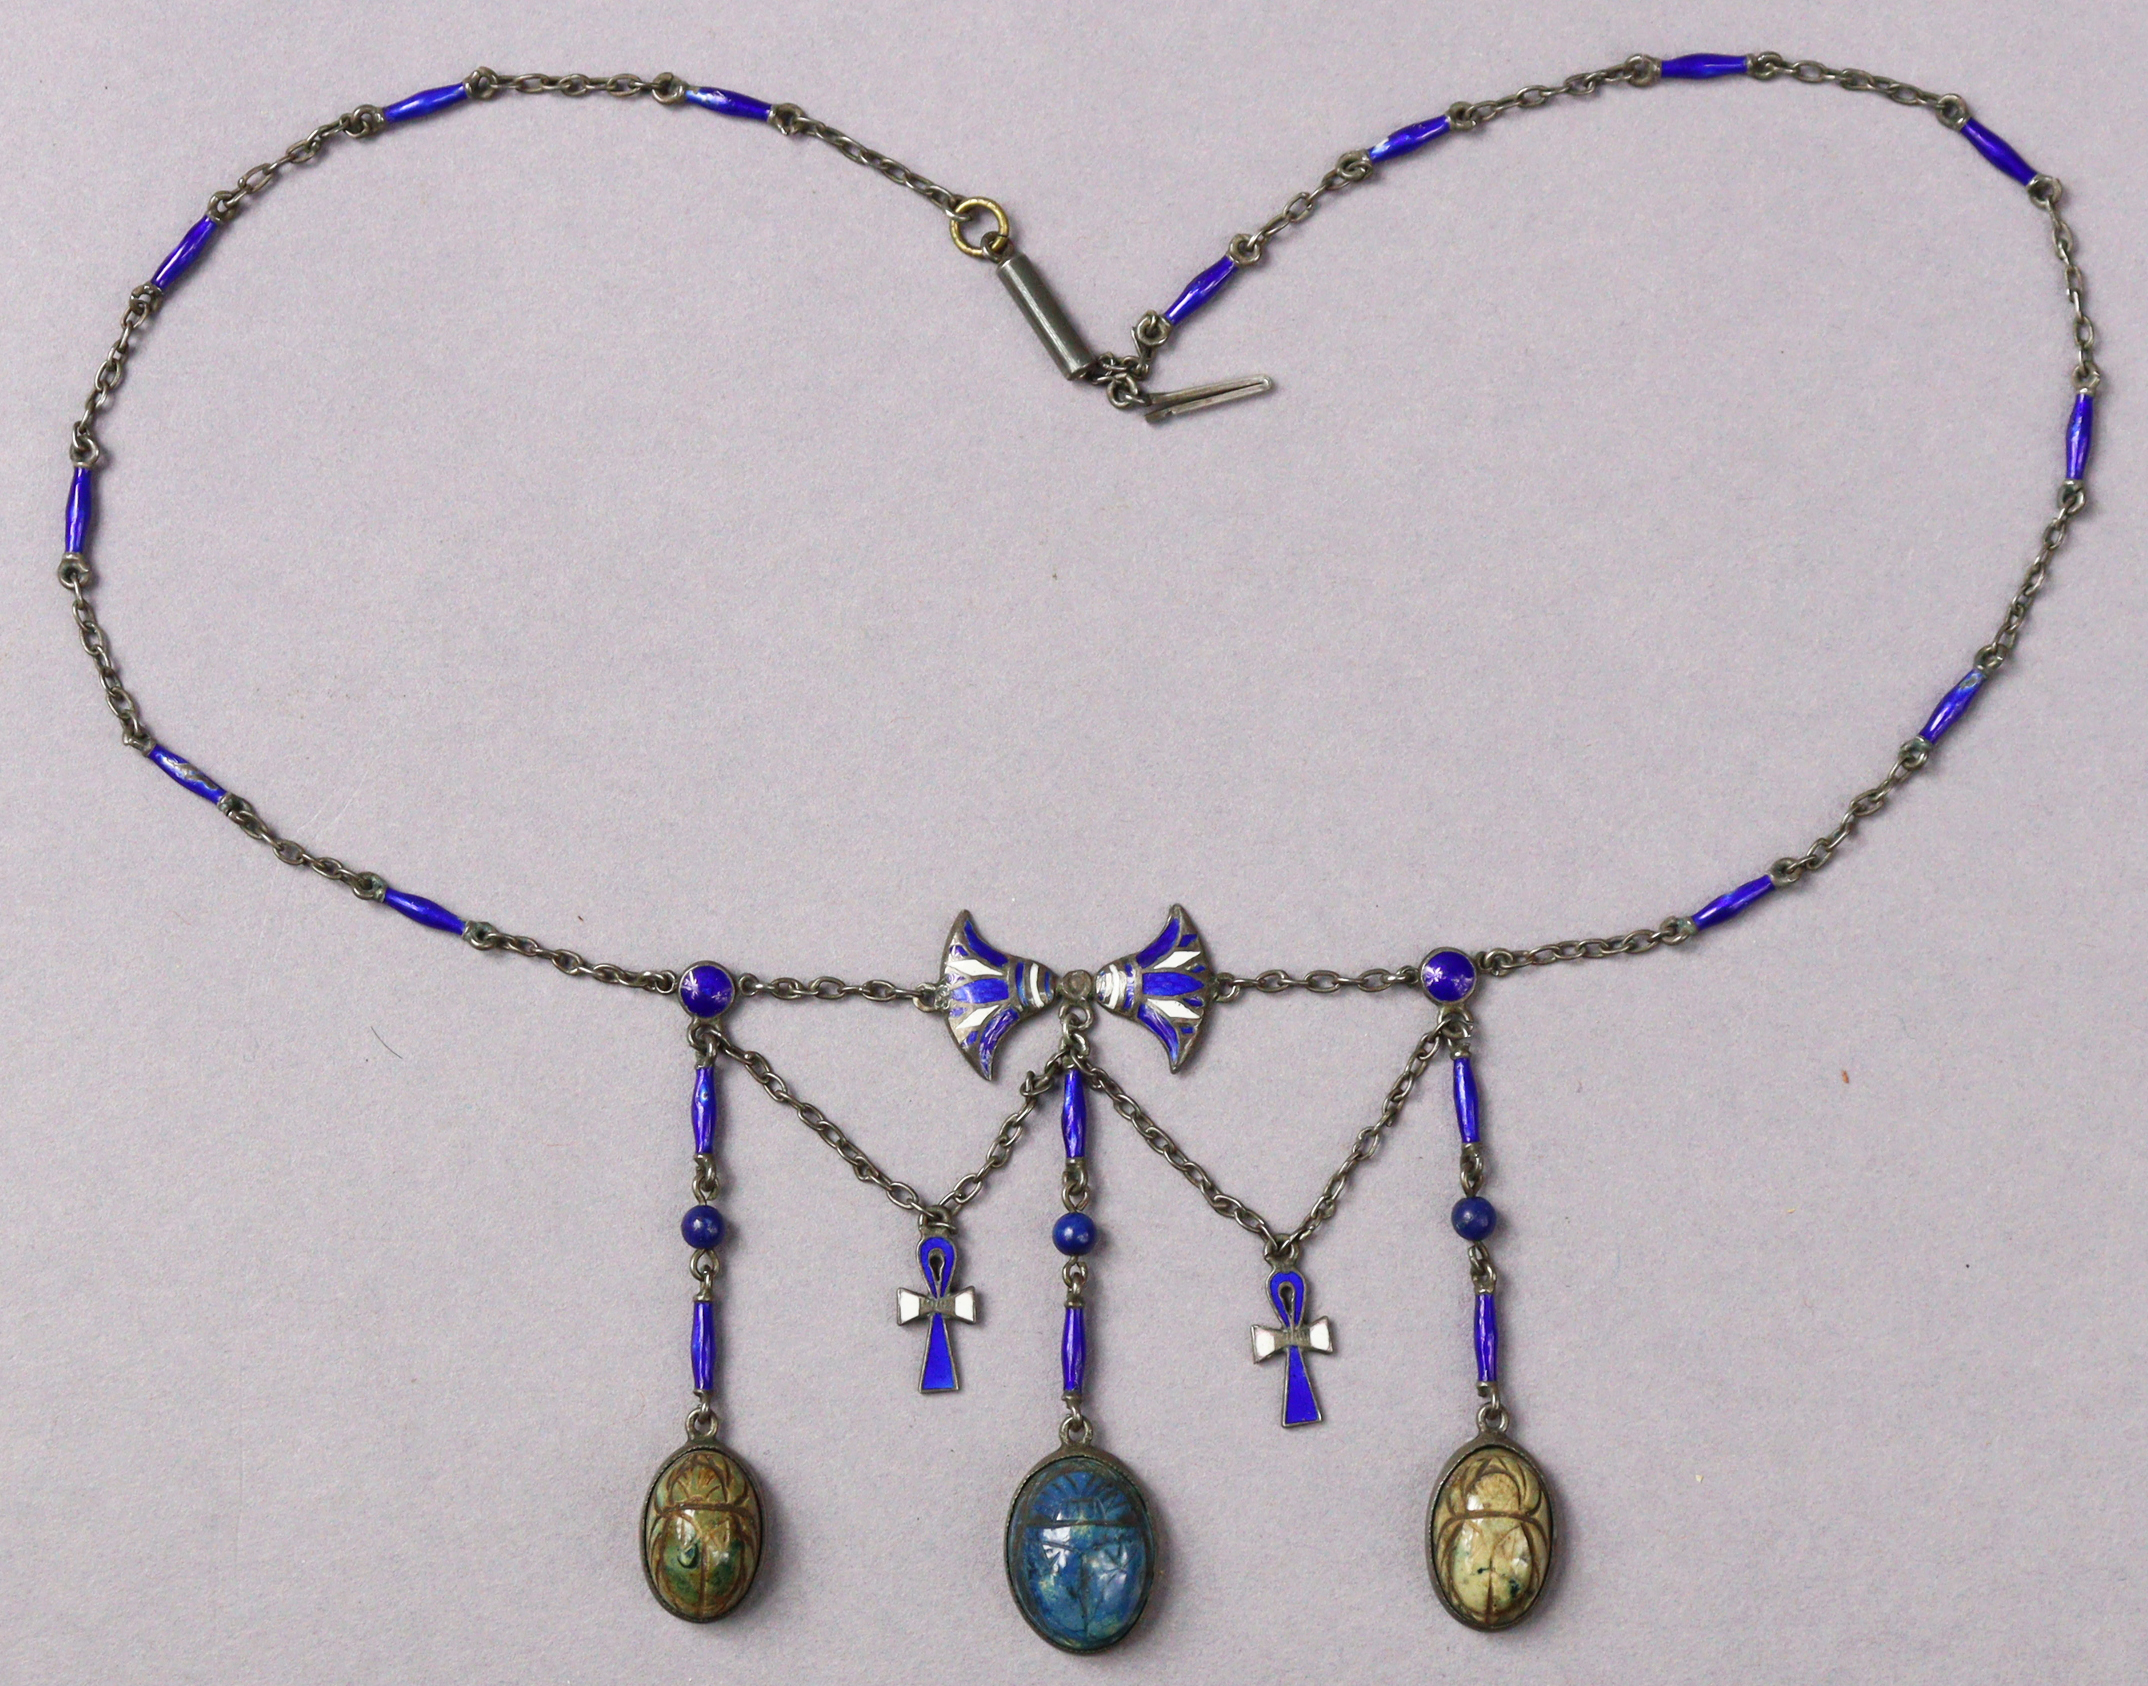 An Egyptian silver & enamel necklace with three scarab pendants, 37cm long. - Image 4 of 5